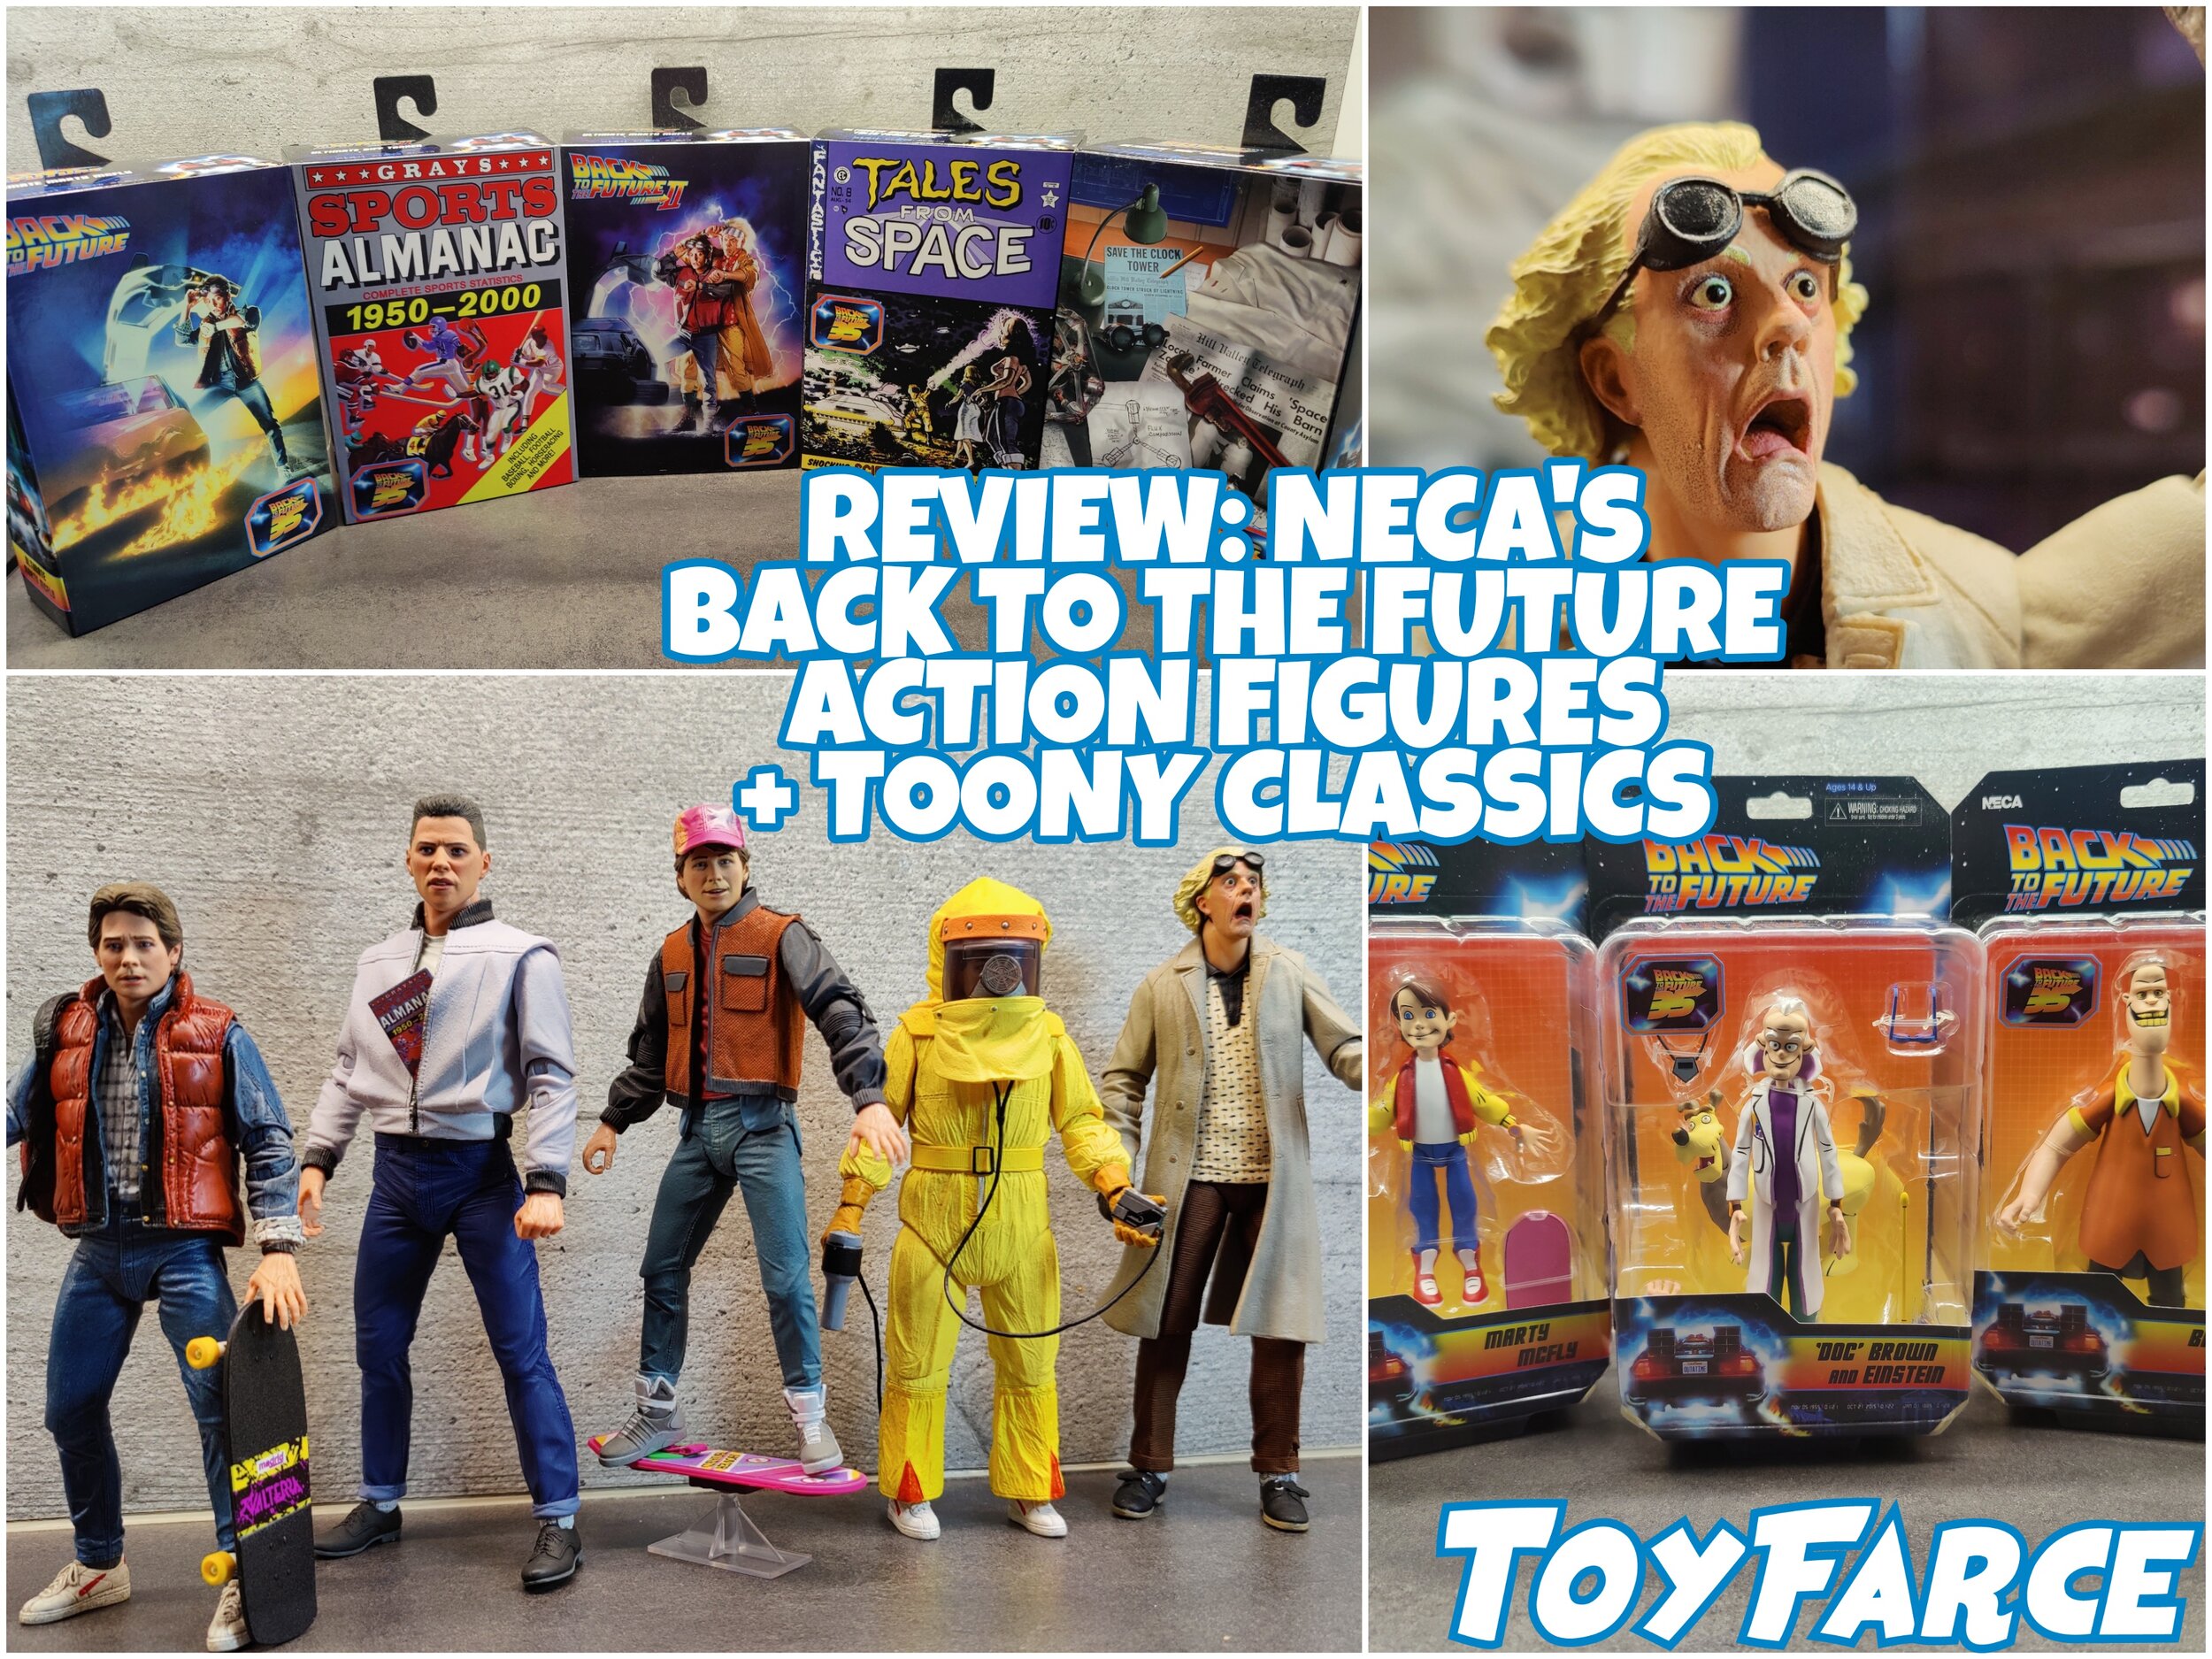 ToyFarce — REVIEW: NECA'S BACK TO THE FUTURE ACTION FIGURES + TOONY CLASSICS !